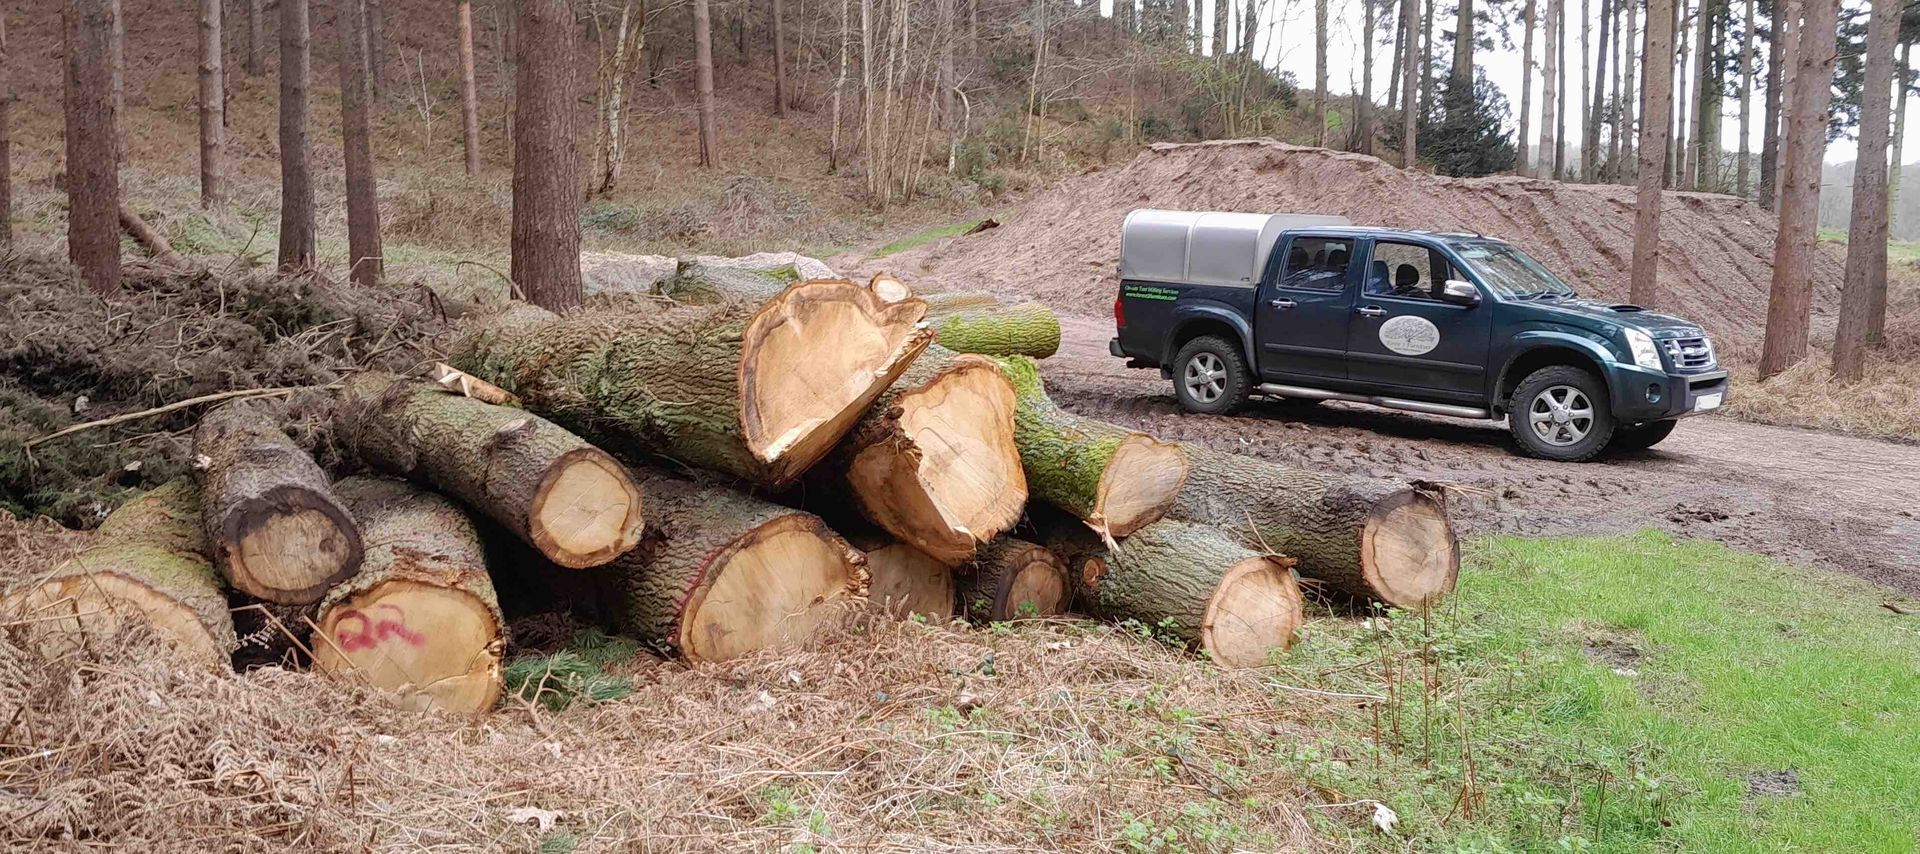 image shows about 20 recently felled Oak trunks waiting to be collected for milling